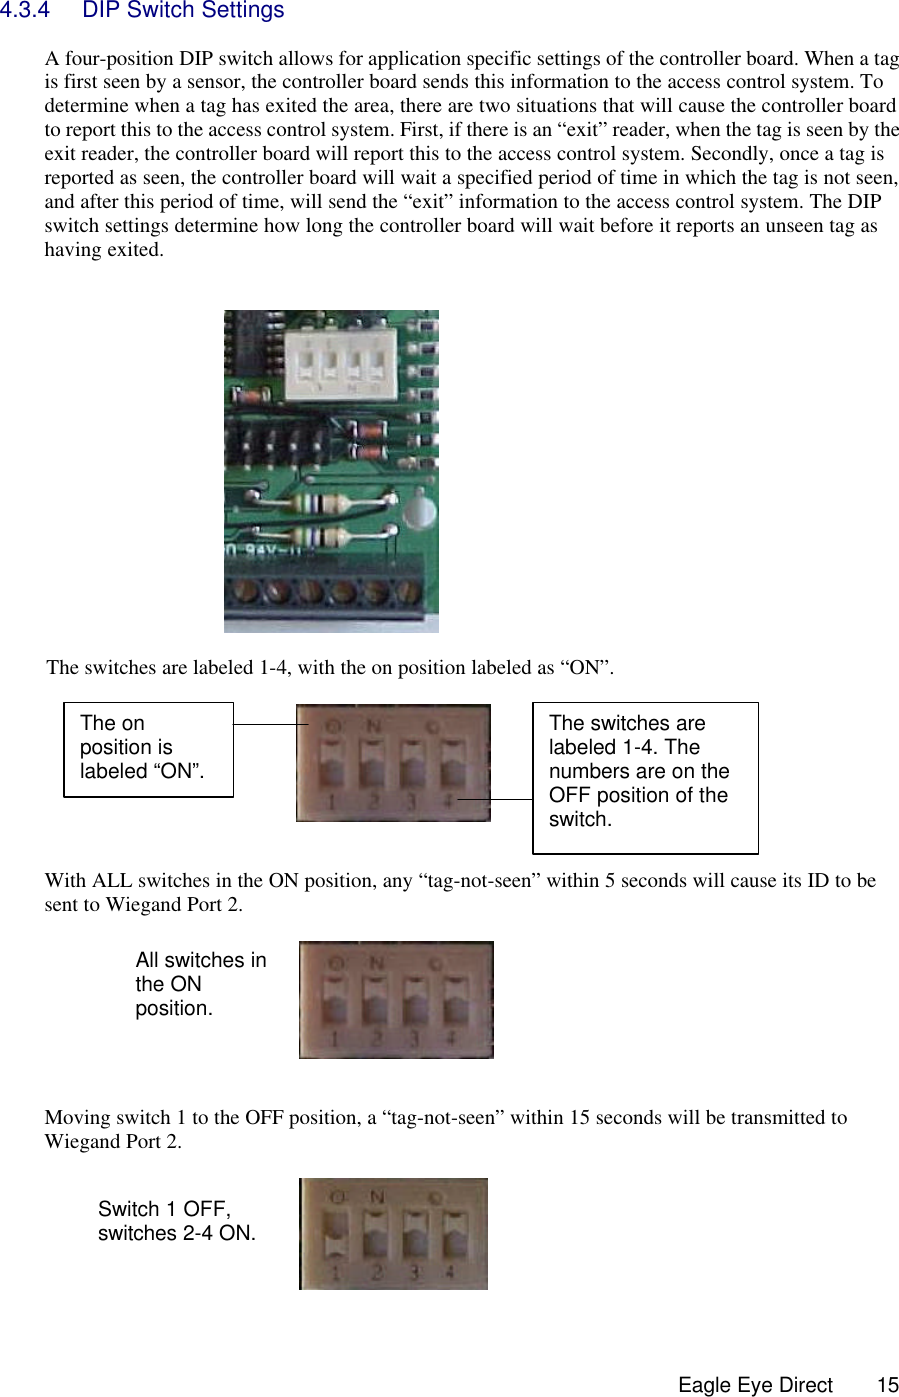  Eagle Eye Direct      15 4.3.4 DIP Switch Settings  A four-position DIP switch allows for application specific settings of the controller board. When a tag is first seen by a sensor, the controller board sends this information to the access control system. To determine when a tag has exited the area, there are two situations that will cause the controller board to report this to the access control system. First, if there is an “exit” reader, when the tag is seen by the exit reader, the controller board will report this to the access control system. Secondly, once a tag is reported as seen, the controller board will wait a specified period of time in which the tag is not seen, and after this period of time, will send the “exit” information to the access control system. The DIP switch settings determine how long the controller board will wait before it reports an unseen tag as having exited.     The switches are labeled 1-4, with the on position labeled as “ON”.                    With ALL switches in the ON position, any “tag-not-seen” within 5 seconds will cause its ID to be sent to Wiegand Port 2.          Moving switch 1 to the OFF position, a “tag-not-seen” within 15 seconds will be transmitted to Wiegand Port 2.    The on position is labeled “ON”.  The switches are labeled 1-4. The numbers are on the OFF position of the switch. All switches in the ON position. Switch 1 OFF, switches 2-4 ON.  